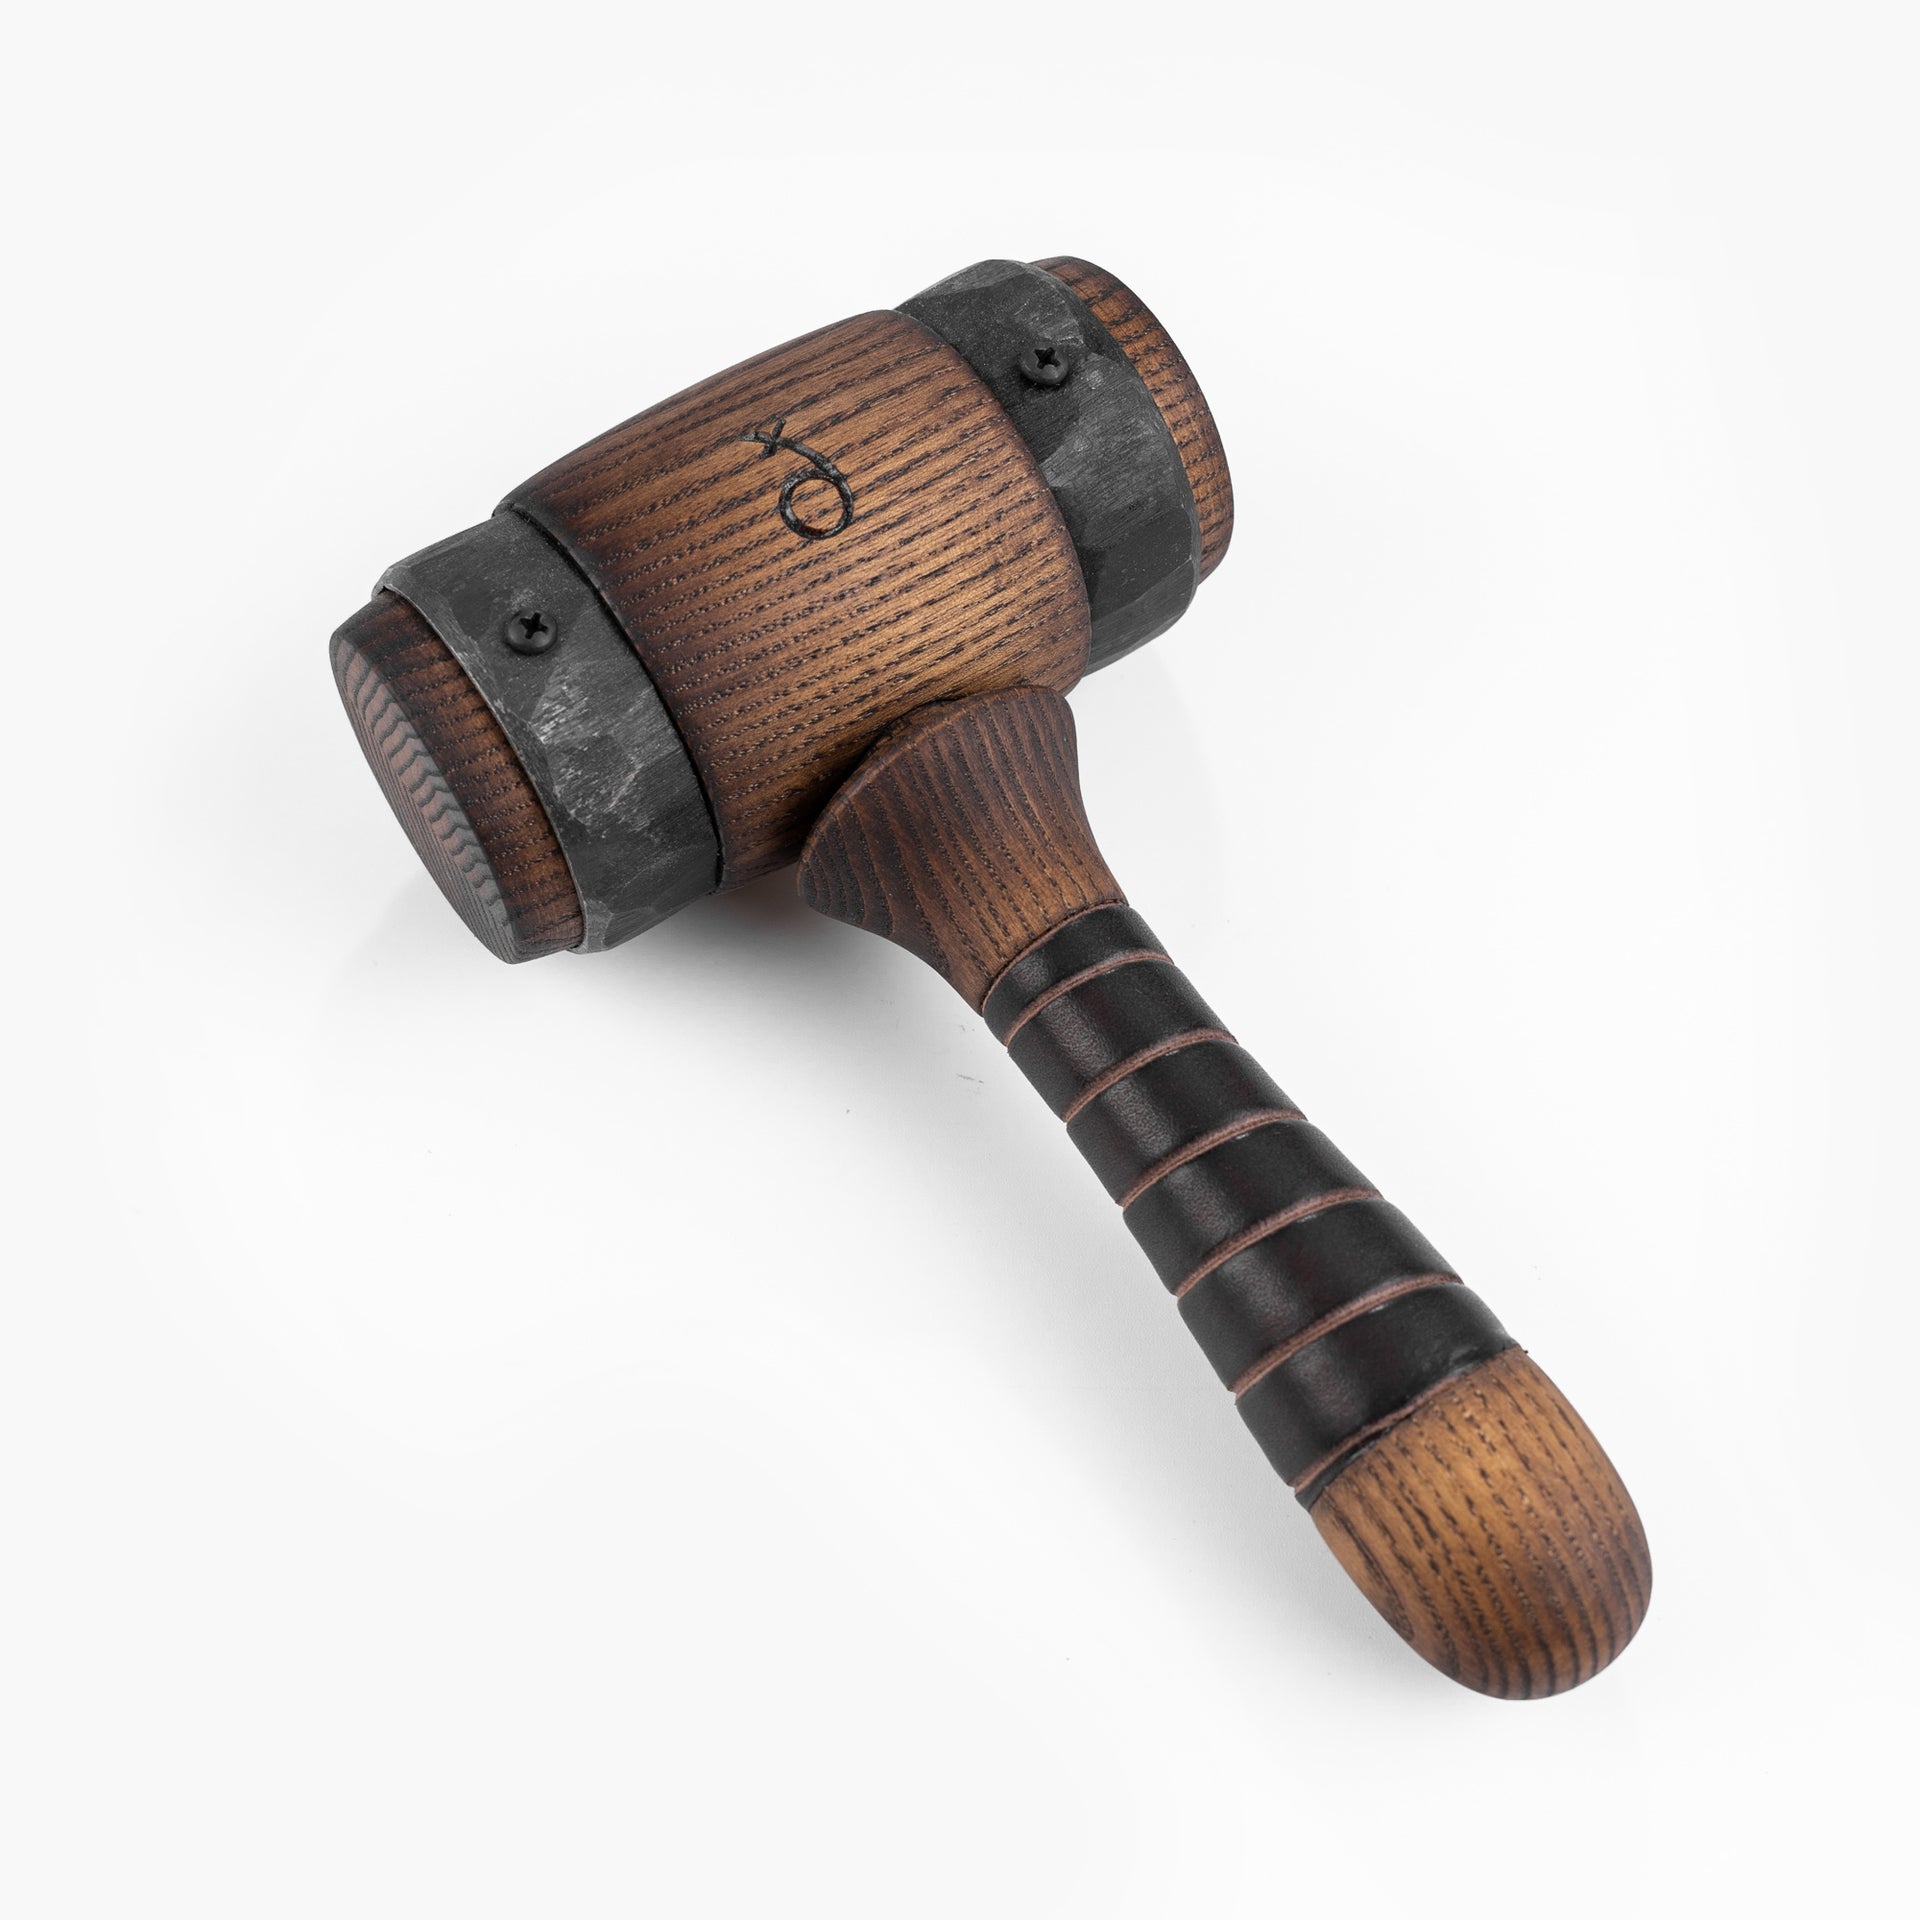 Big round wooden mallet with metal rings – Fadir.tool